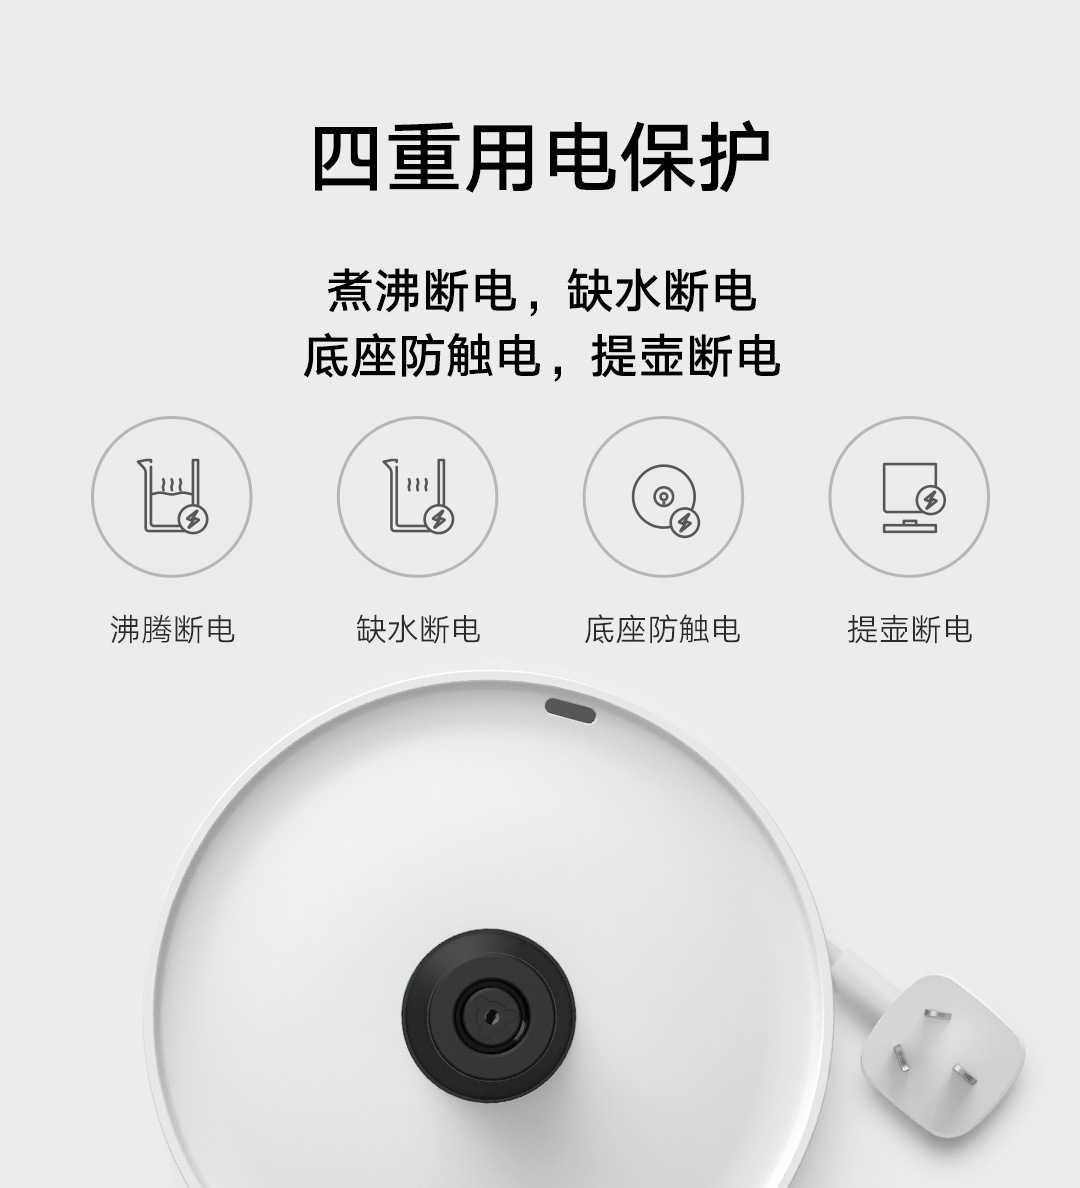 Xiaomi Electric Kettle 1A Large Capacity MIJIA Kettle Home Appliance Electrical Kettle Stainless Steel Kettle Insulation